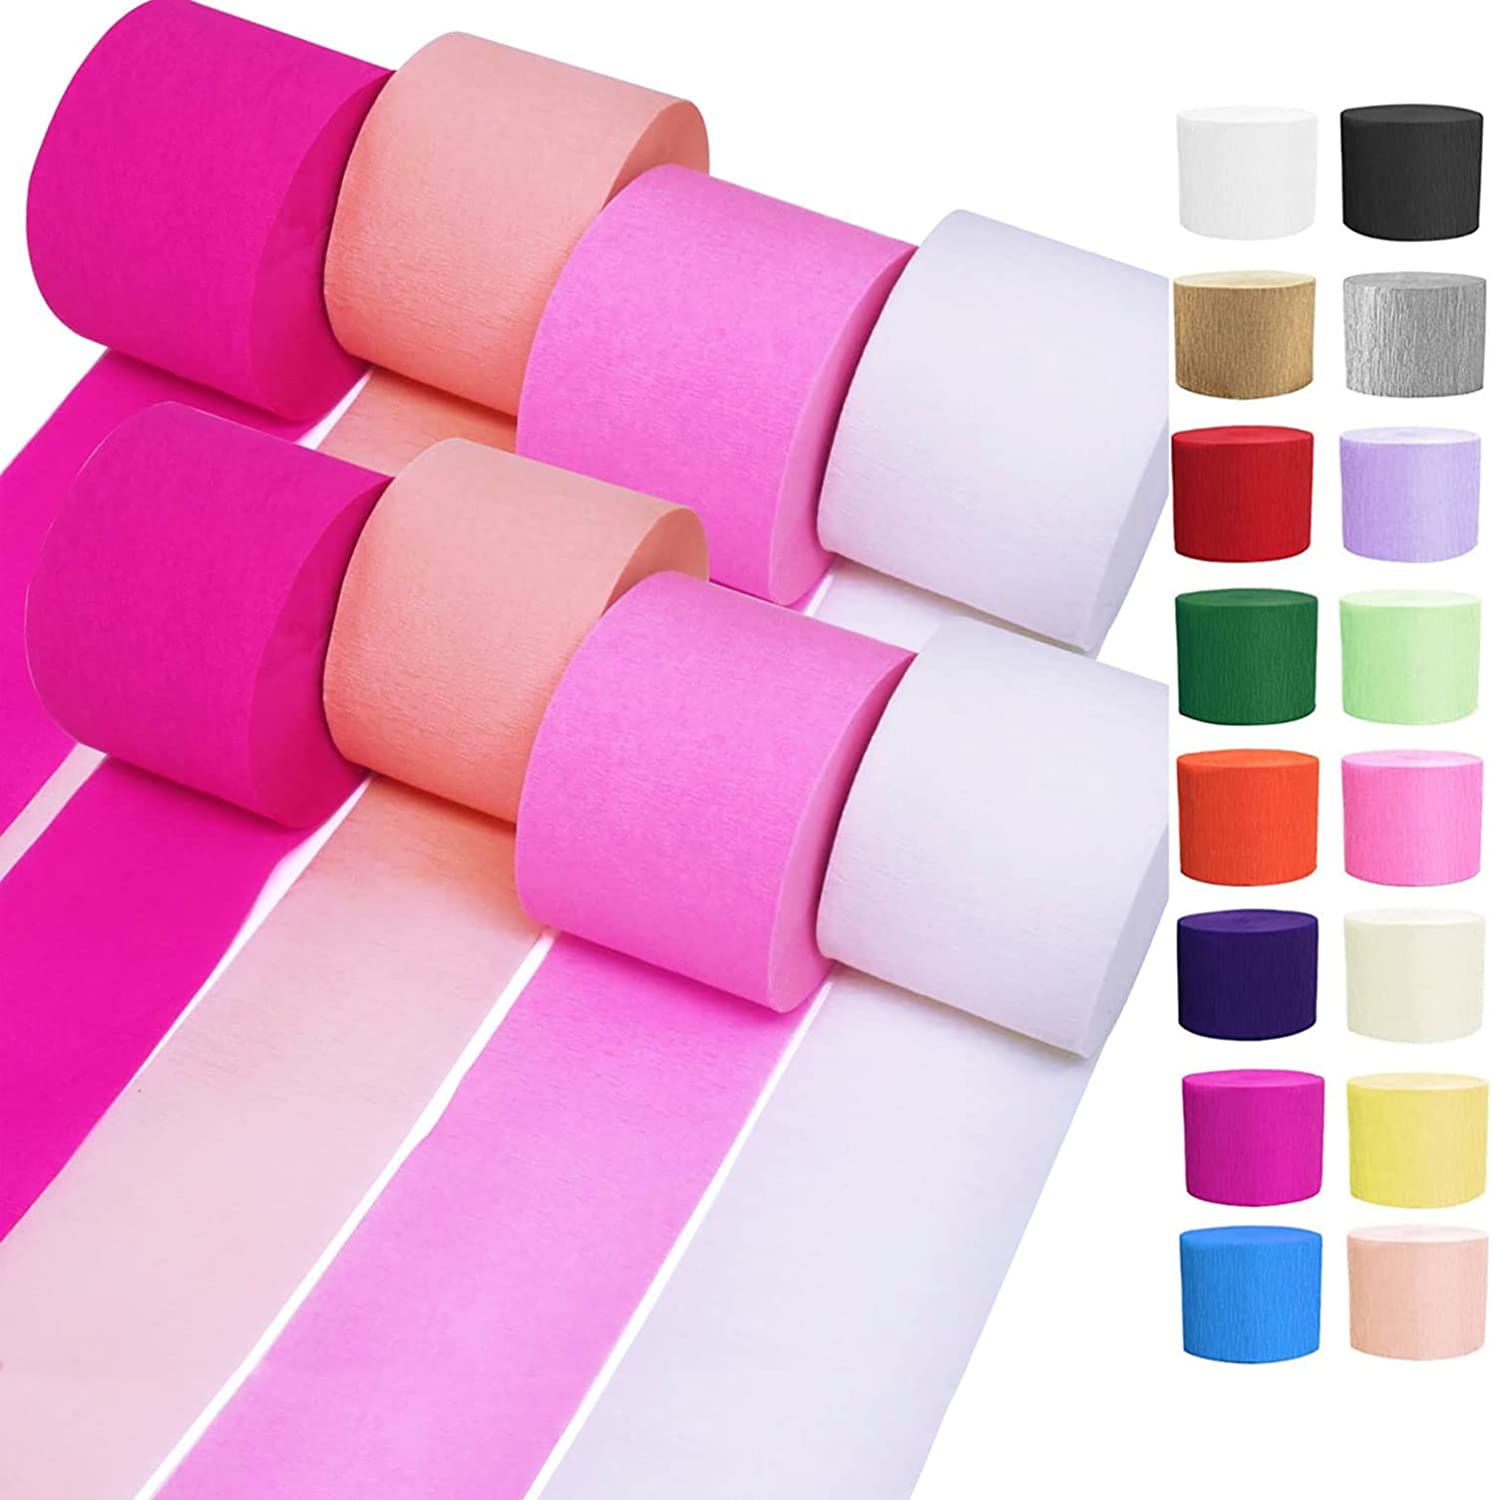 Crepe Paper Streamers (656ft x 1.8inch) - 8 Rolls & 8 Balloons - Pastel Gold & Pink Streamers for Birthday Party Decorations, Backdrop, Arts & Crafts